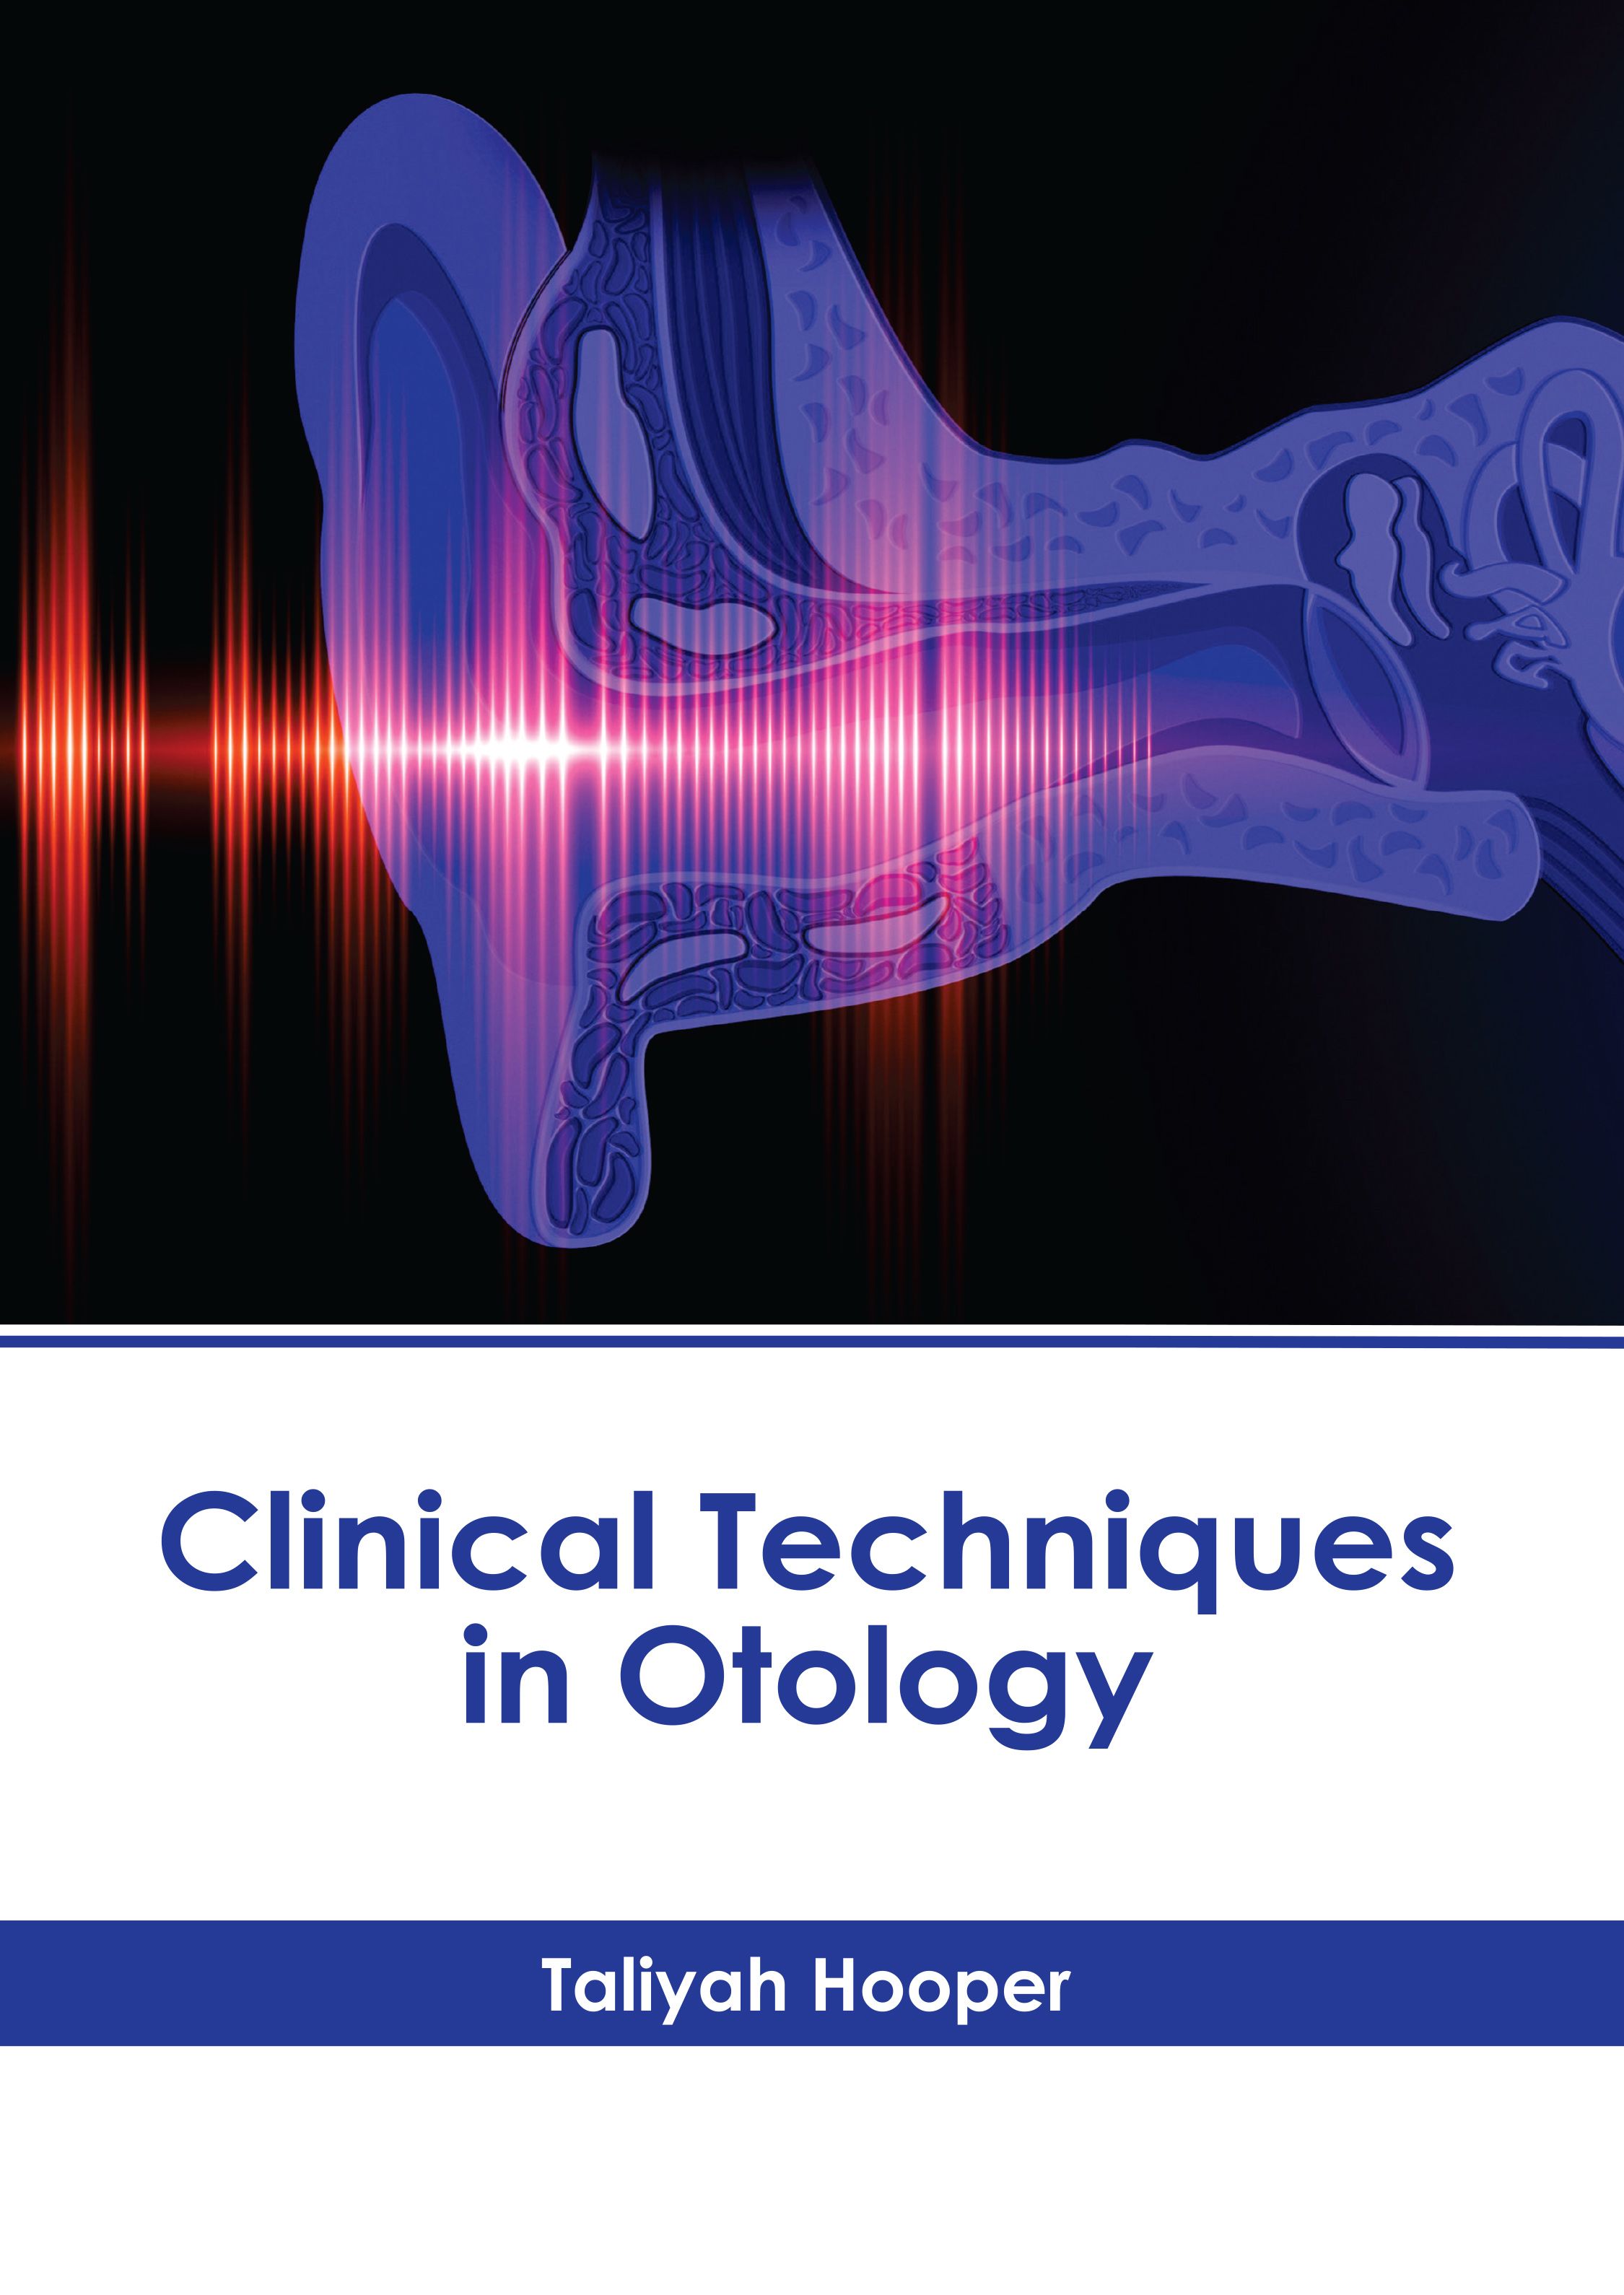 CLINICAL TECHNIQUES IN OTOLOGY